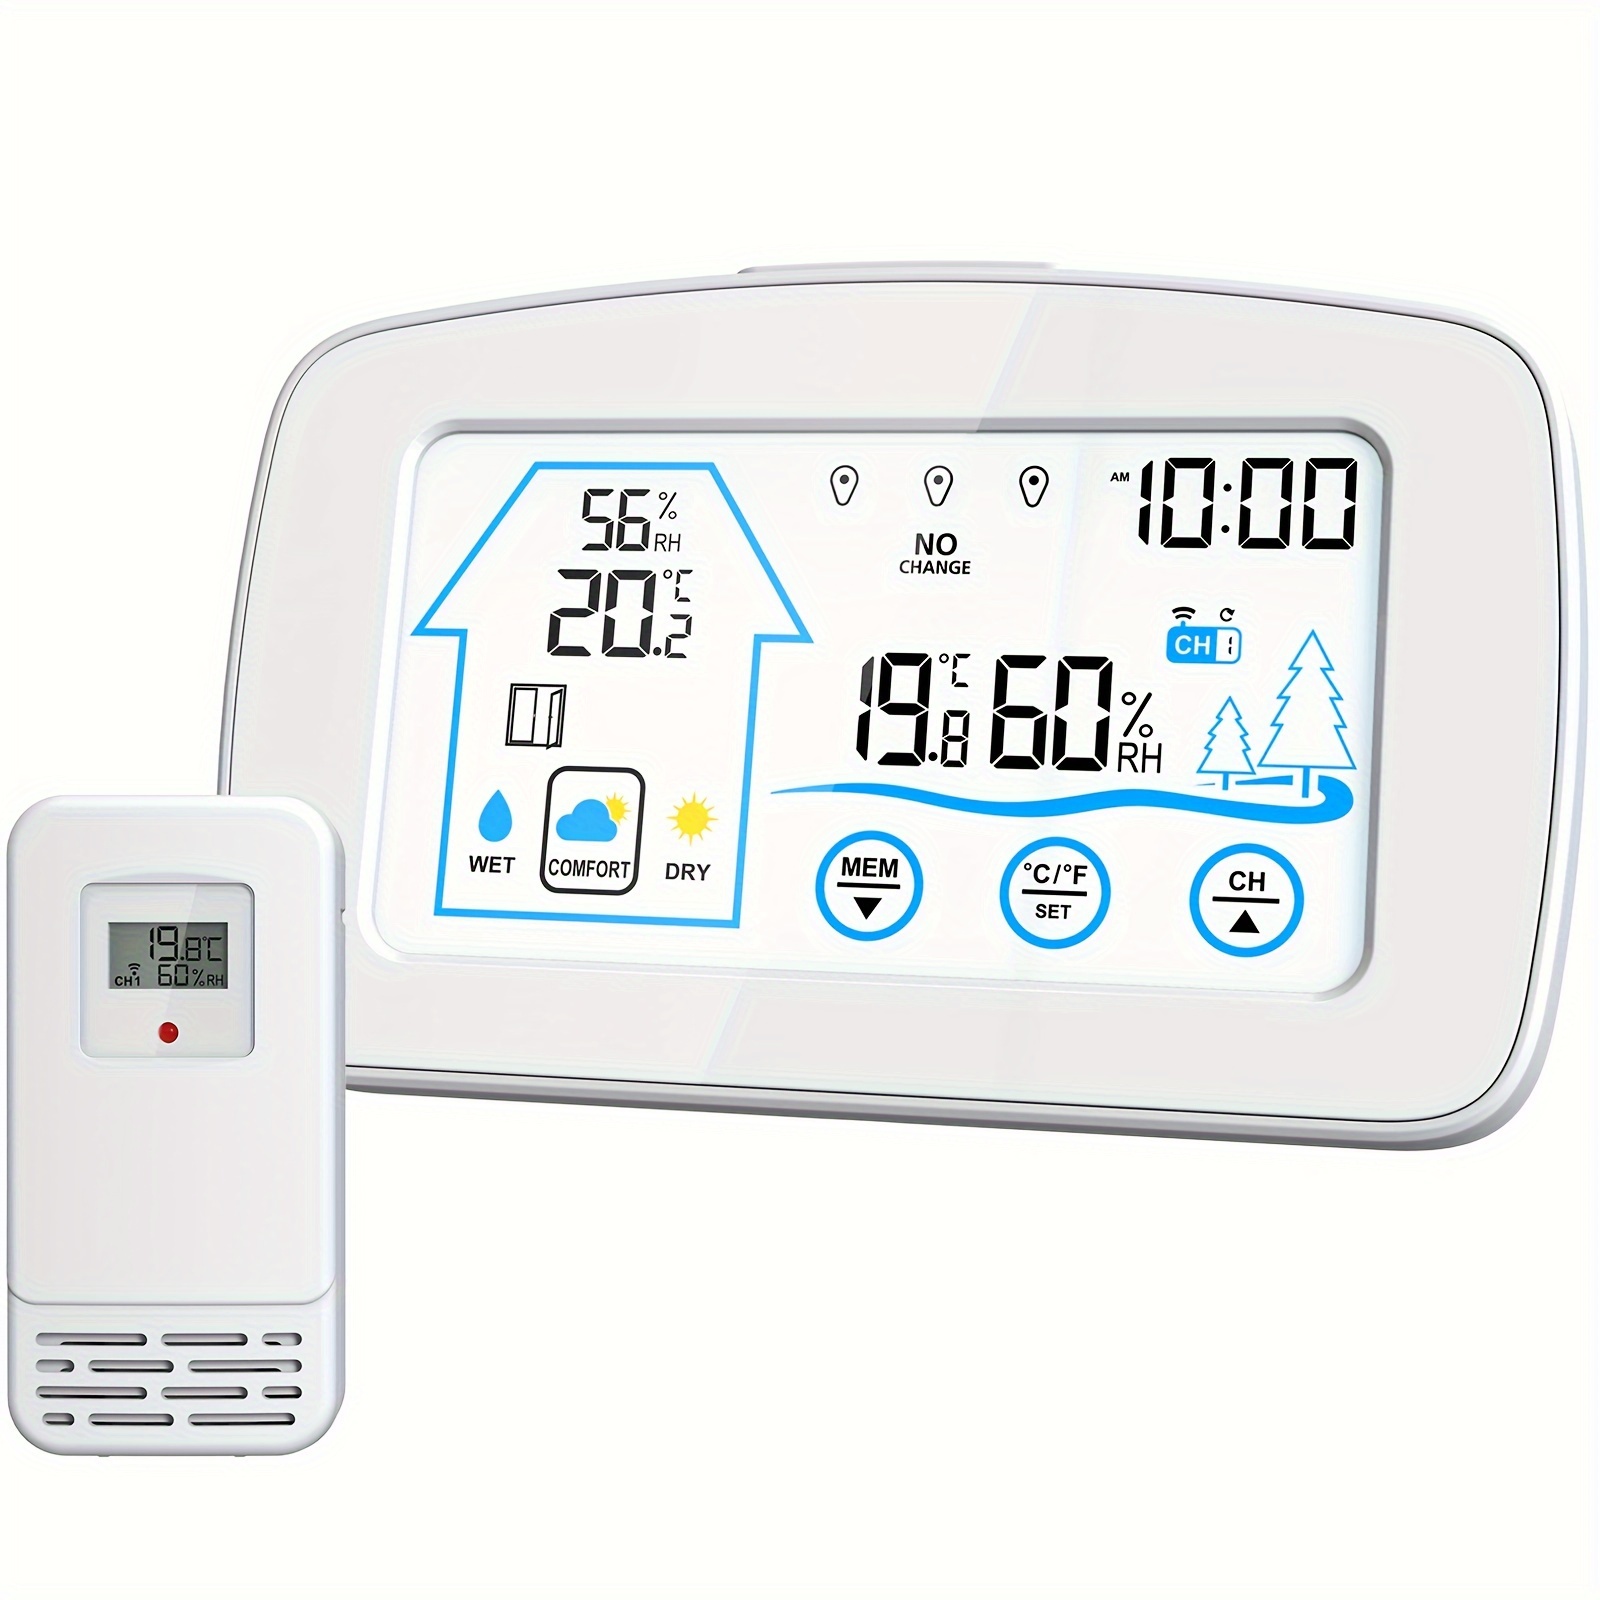 BALDR WiFi Weather Station Wireless Indoor Outdoor Thermometer Wall Alarm  Clock Pressure App Online Real-time Forecast Monitor - AliExpress